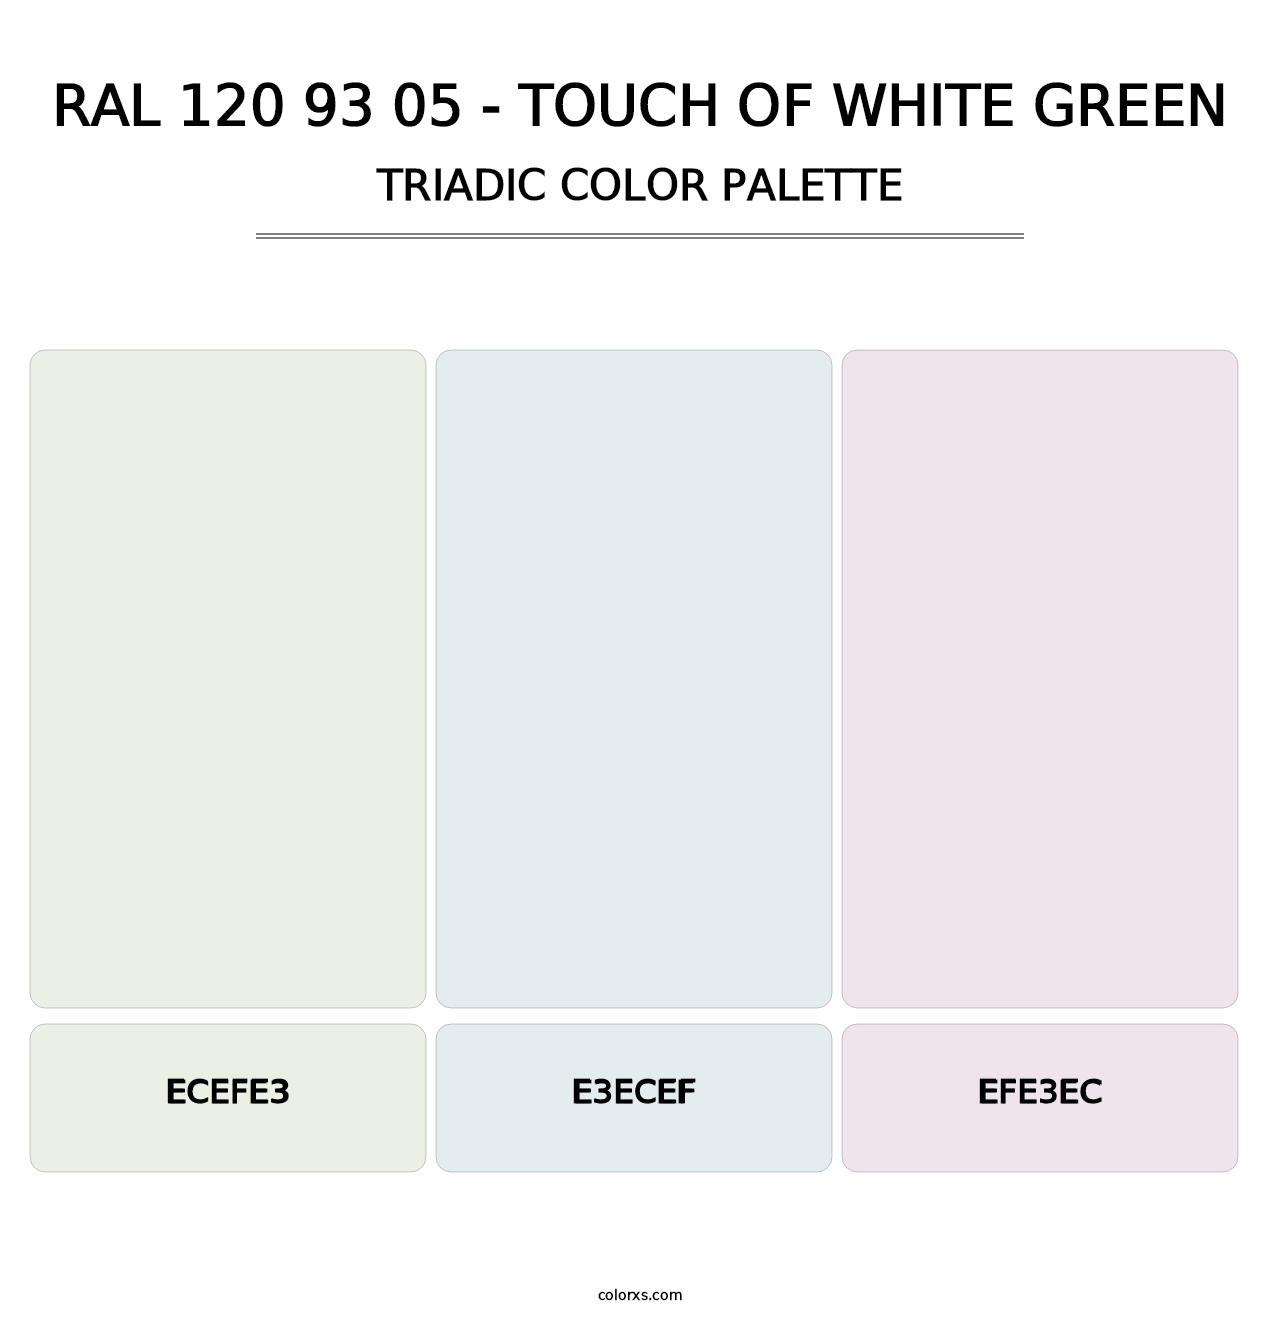 RAL 120 93 05 - Touch Of White Green - Triadic Color Palette